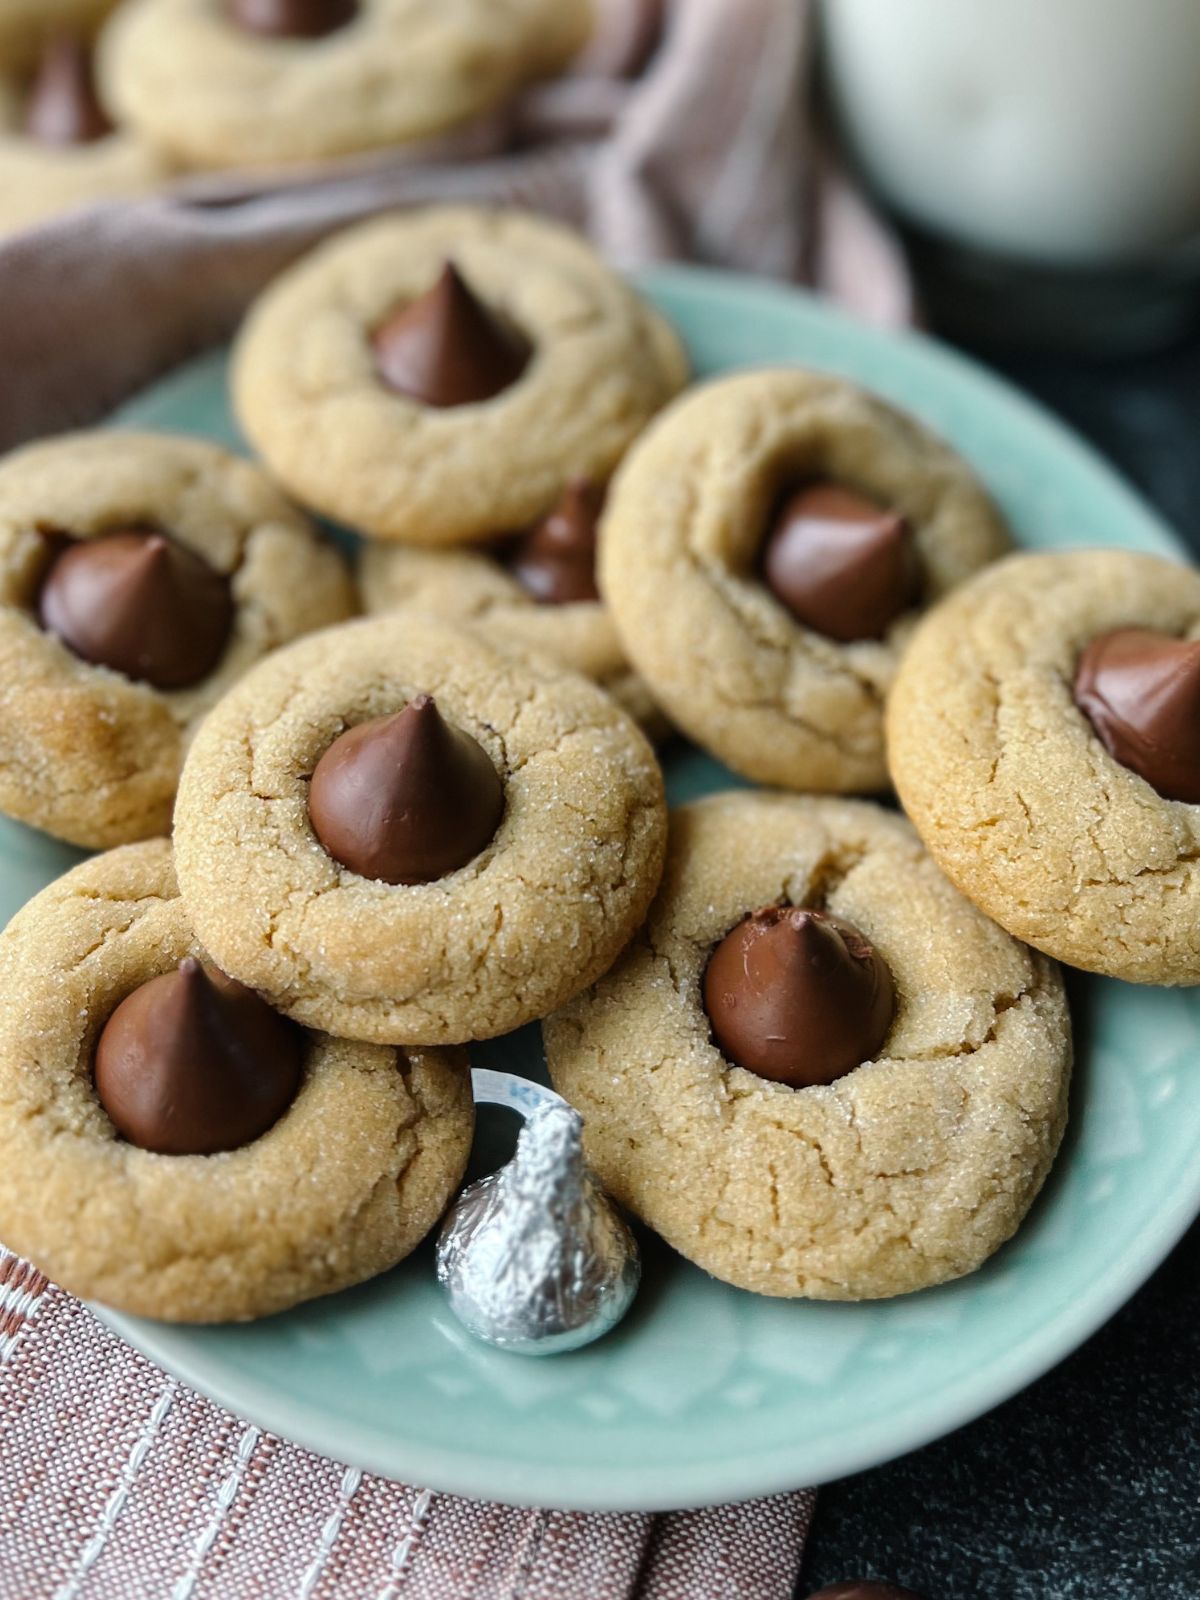 Plate of peanut butter blossoms with another plate of the cookies in the background.